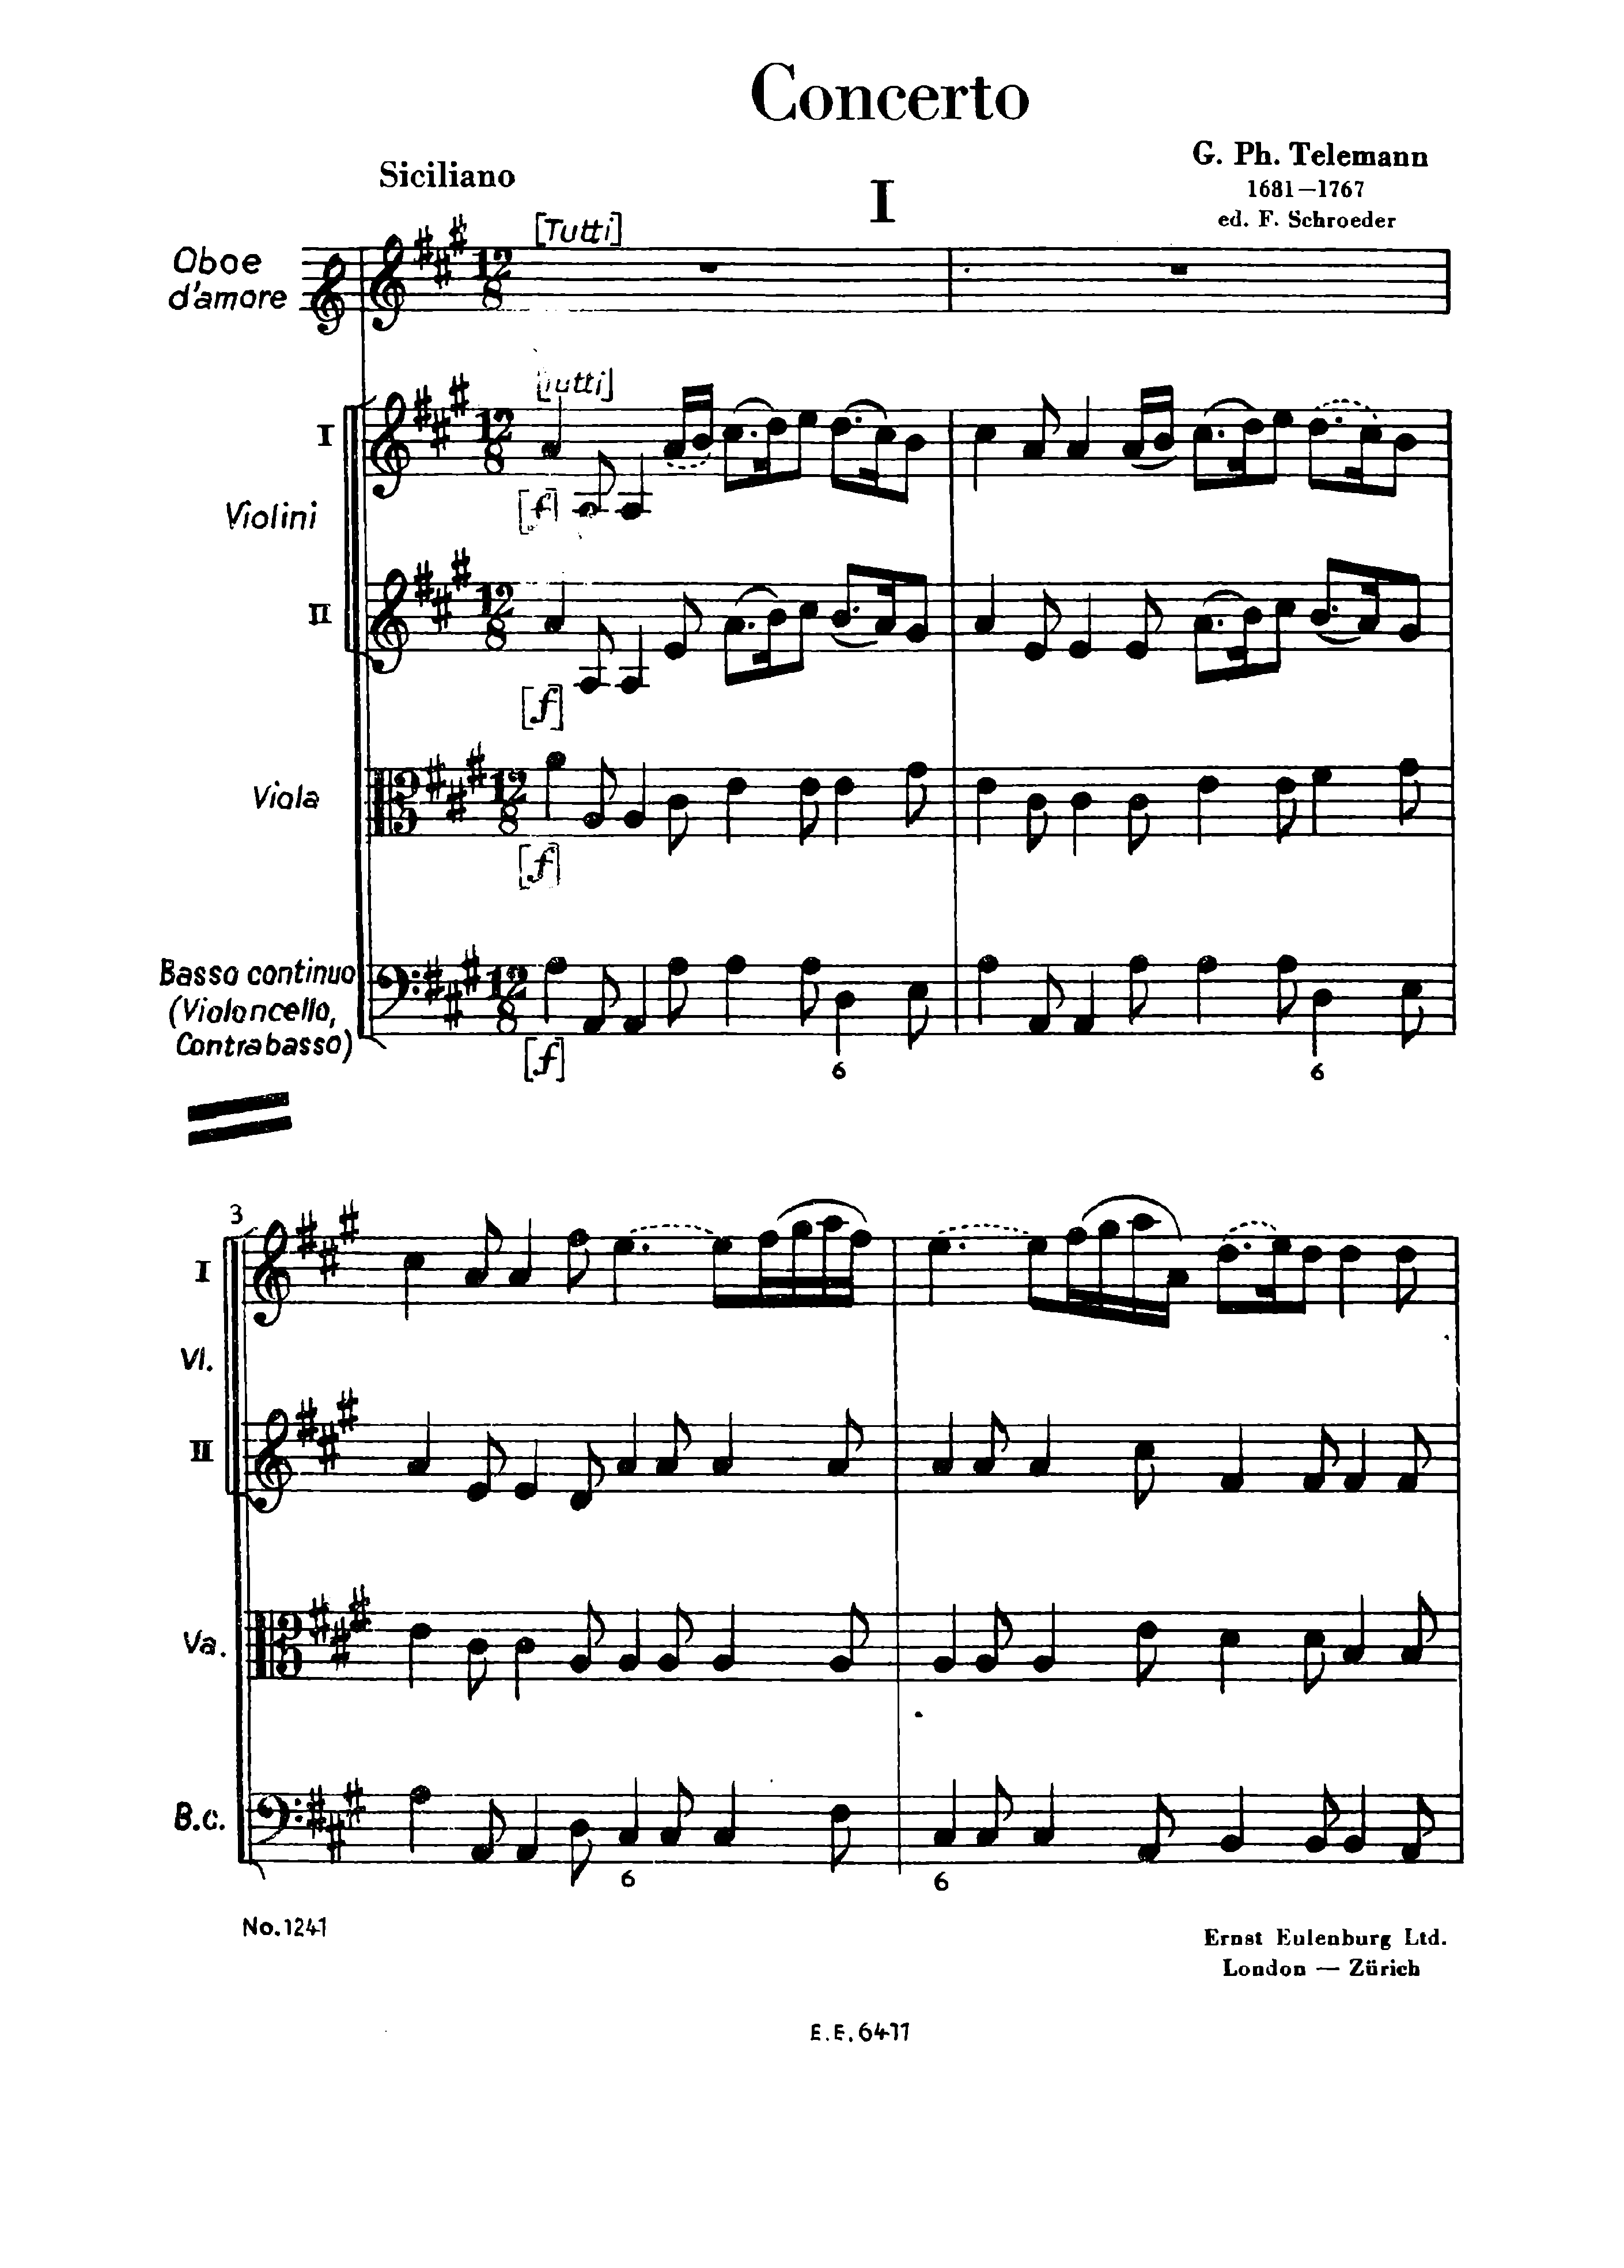 Telemann, Georg Philipp - Concerto for Oboe d'amore, TWV 51:A2 Sheet ...